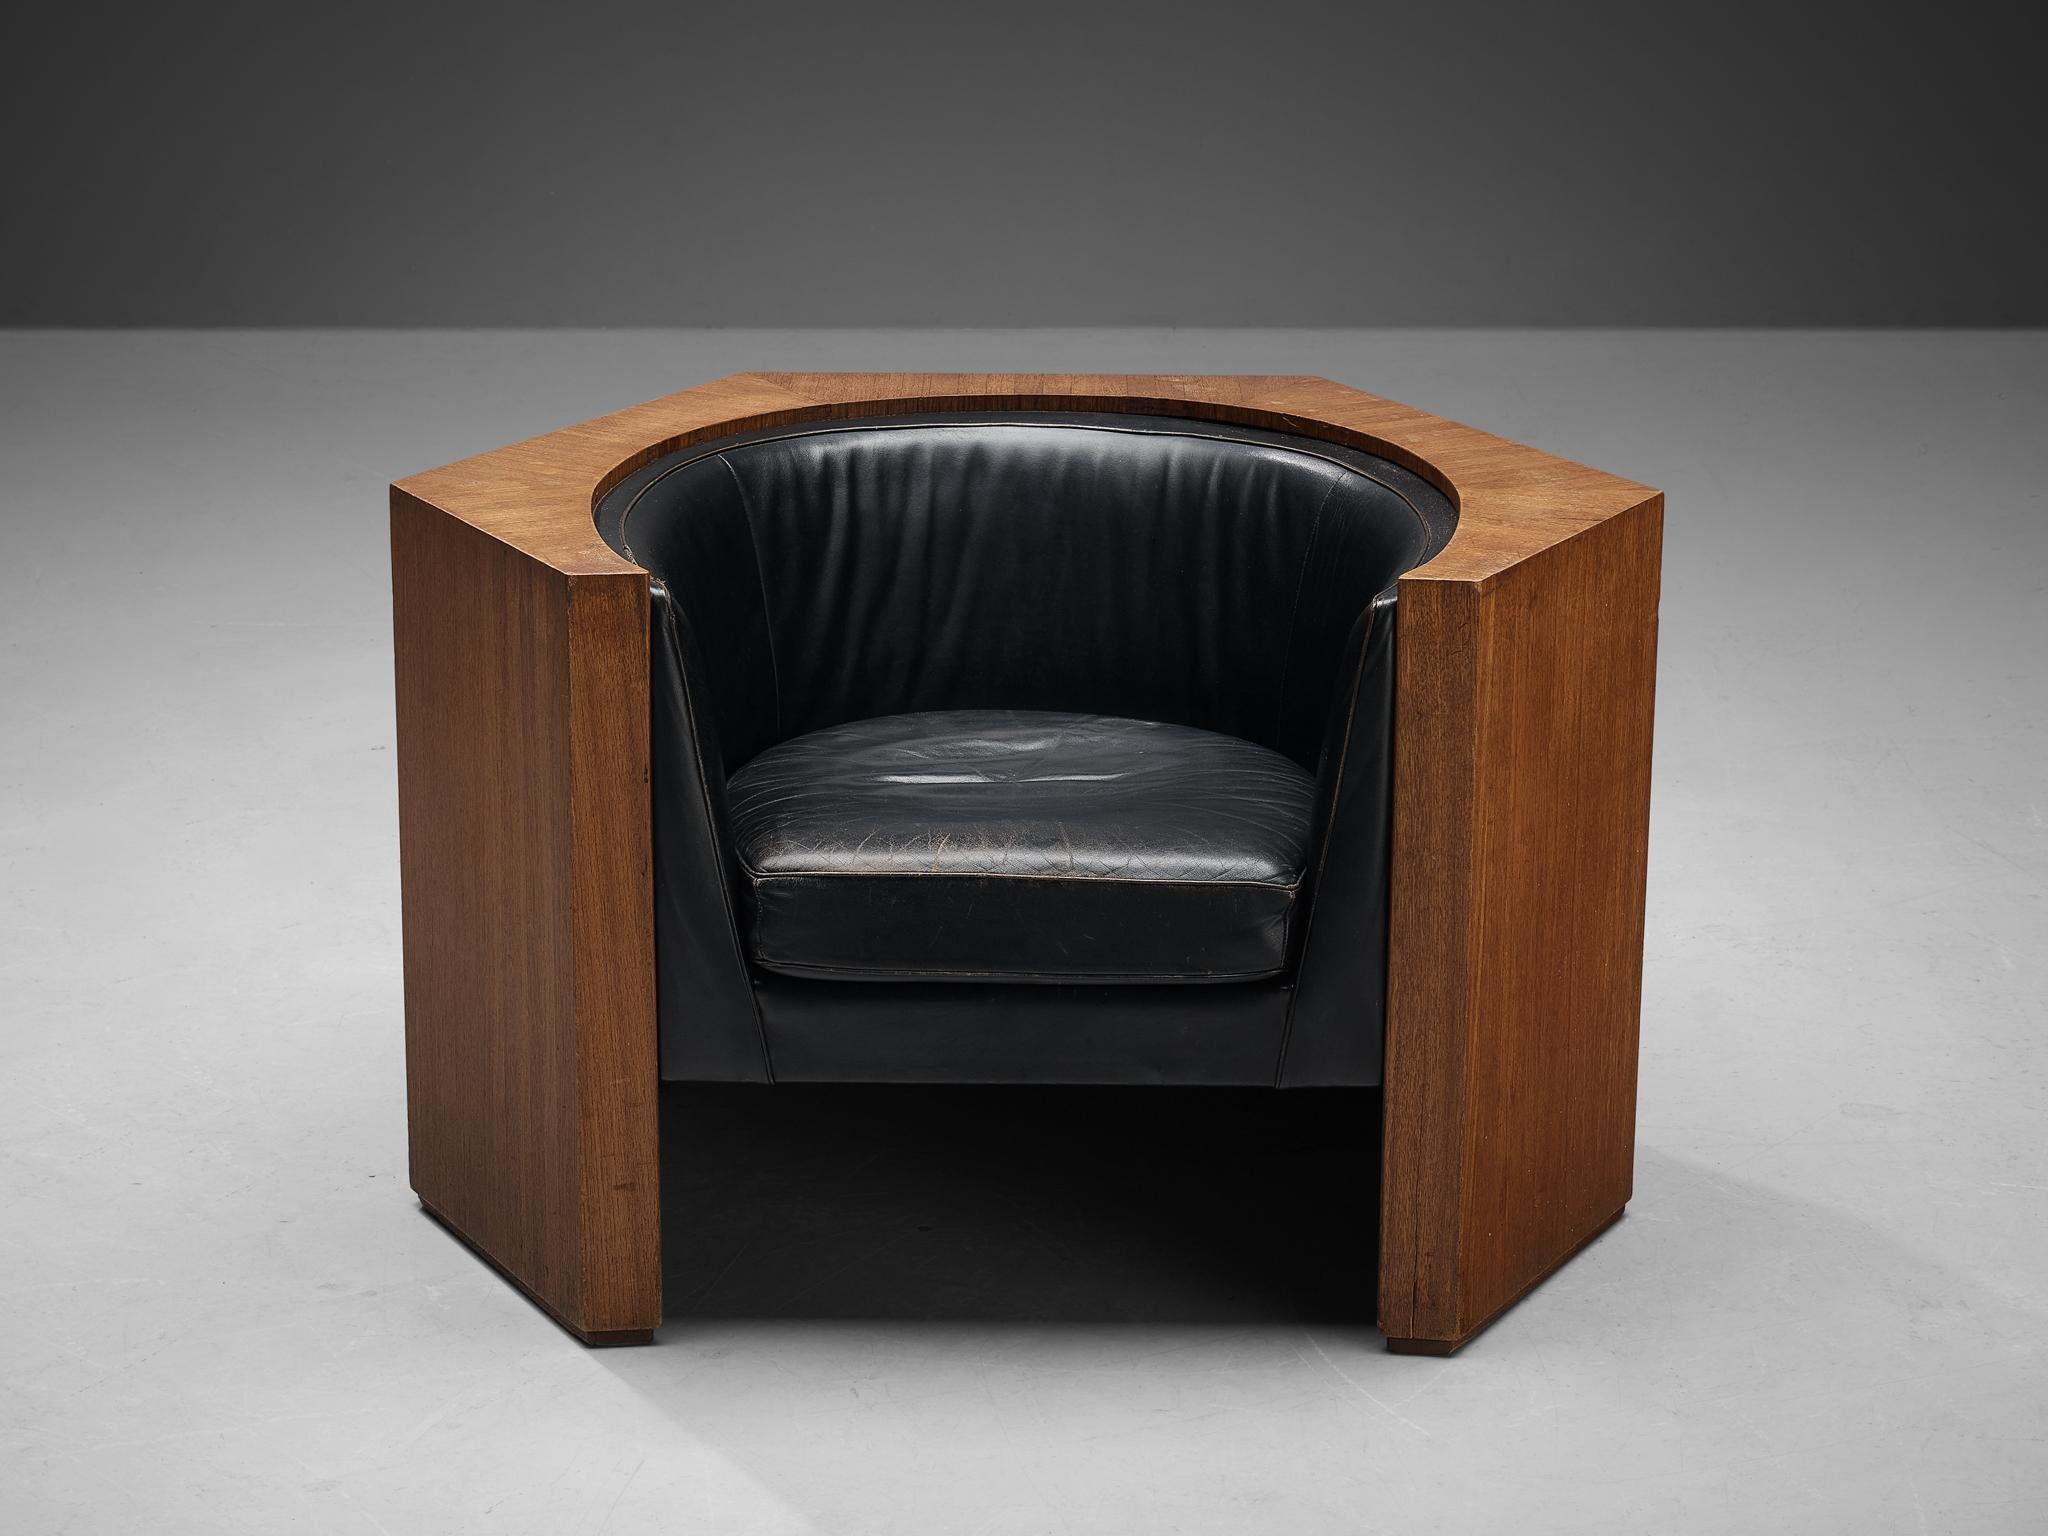 Club chair, leather, teak, Europe, 1980s.

This streamlined lounge chair is expressed by clear lines and pronounced geometric forms. The construction is based on a hexagonal shape that has an open layout at the front, revealing the 